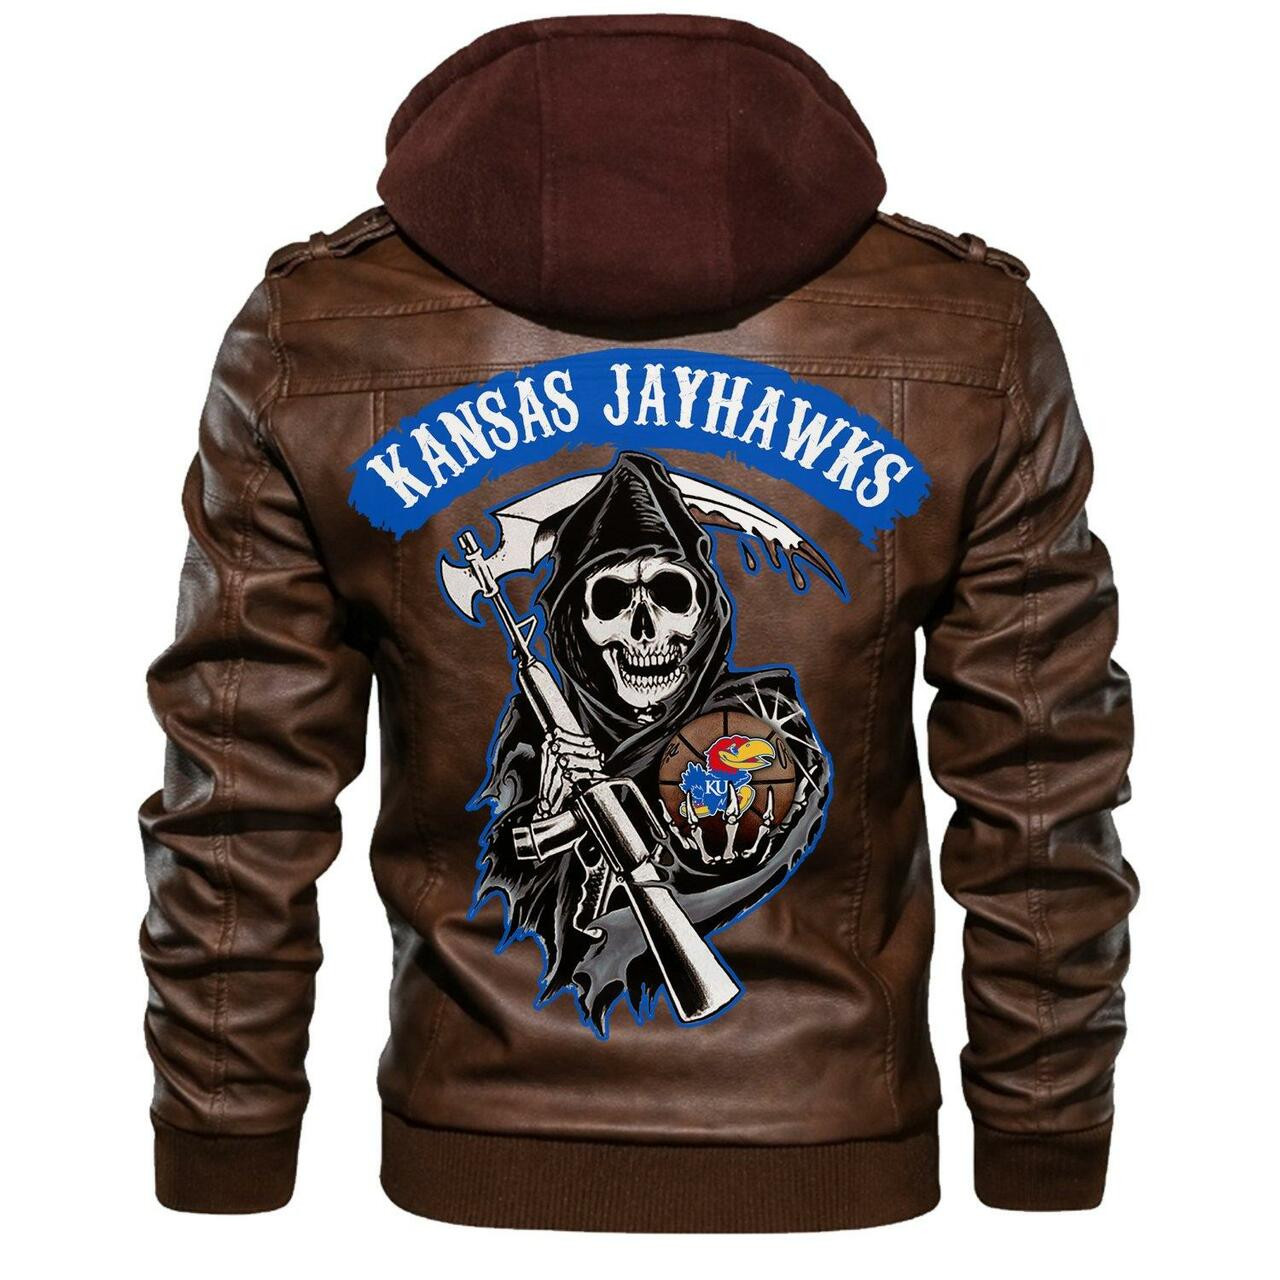 Don't wait another minute, Get Hot Leather Jacket today 103